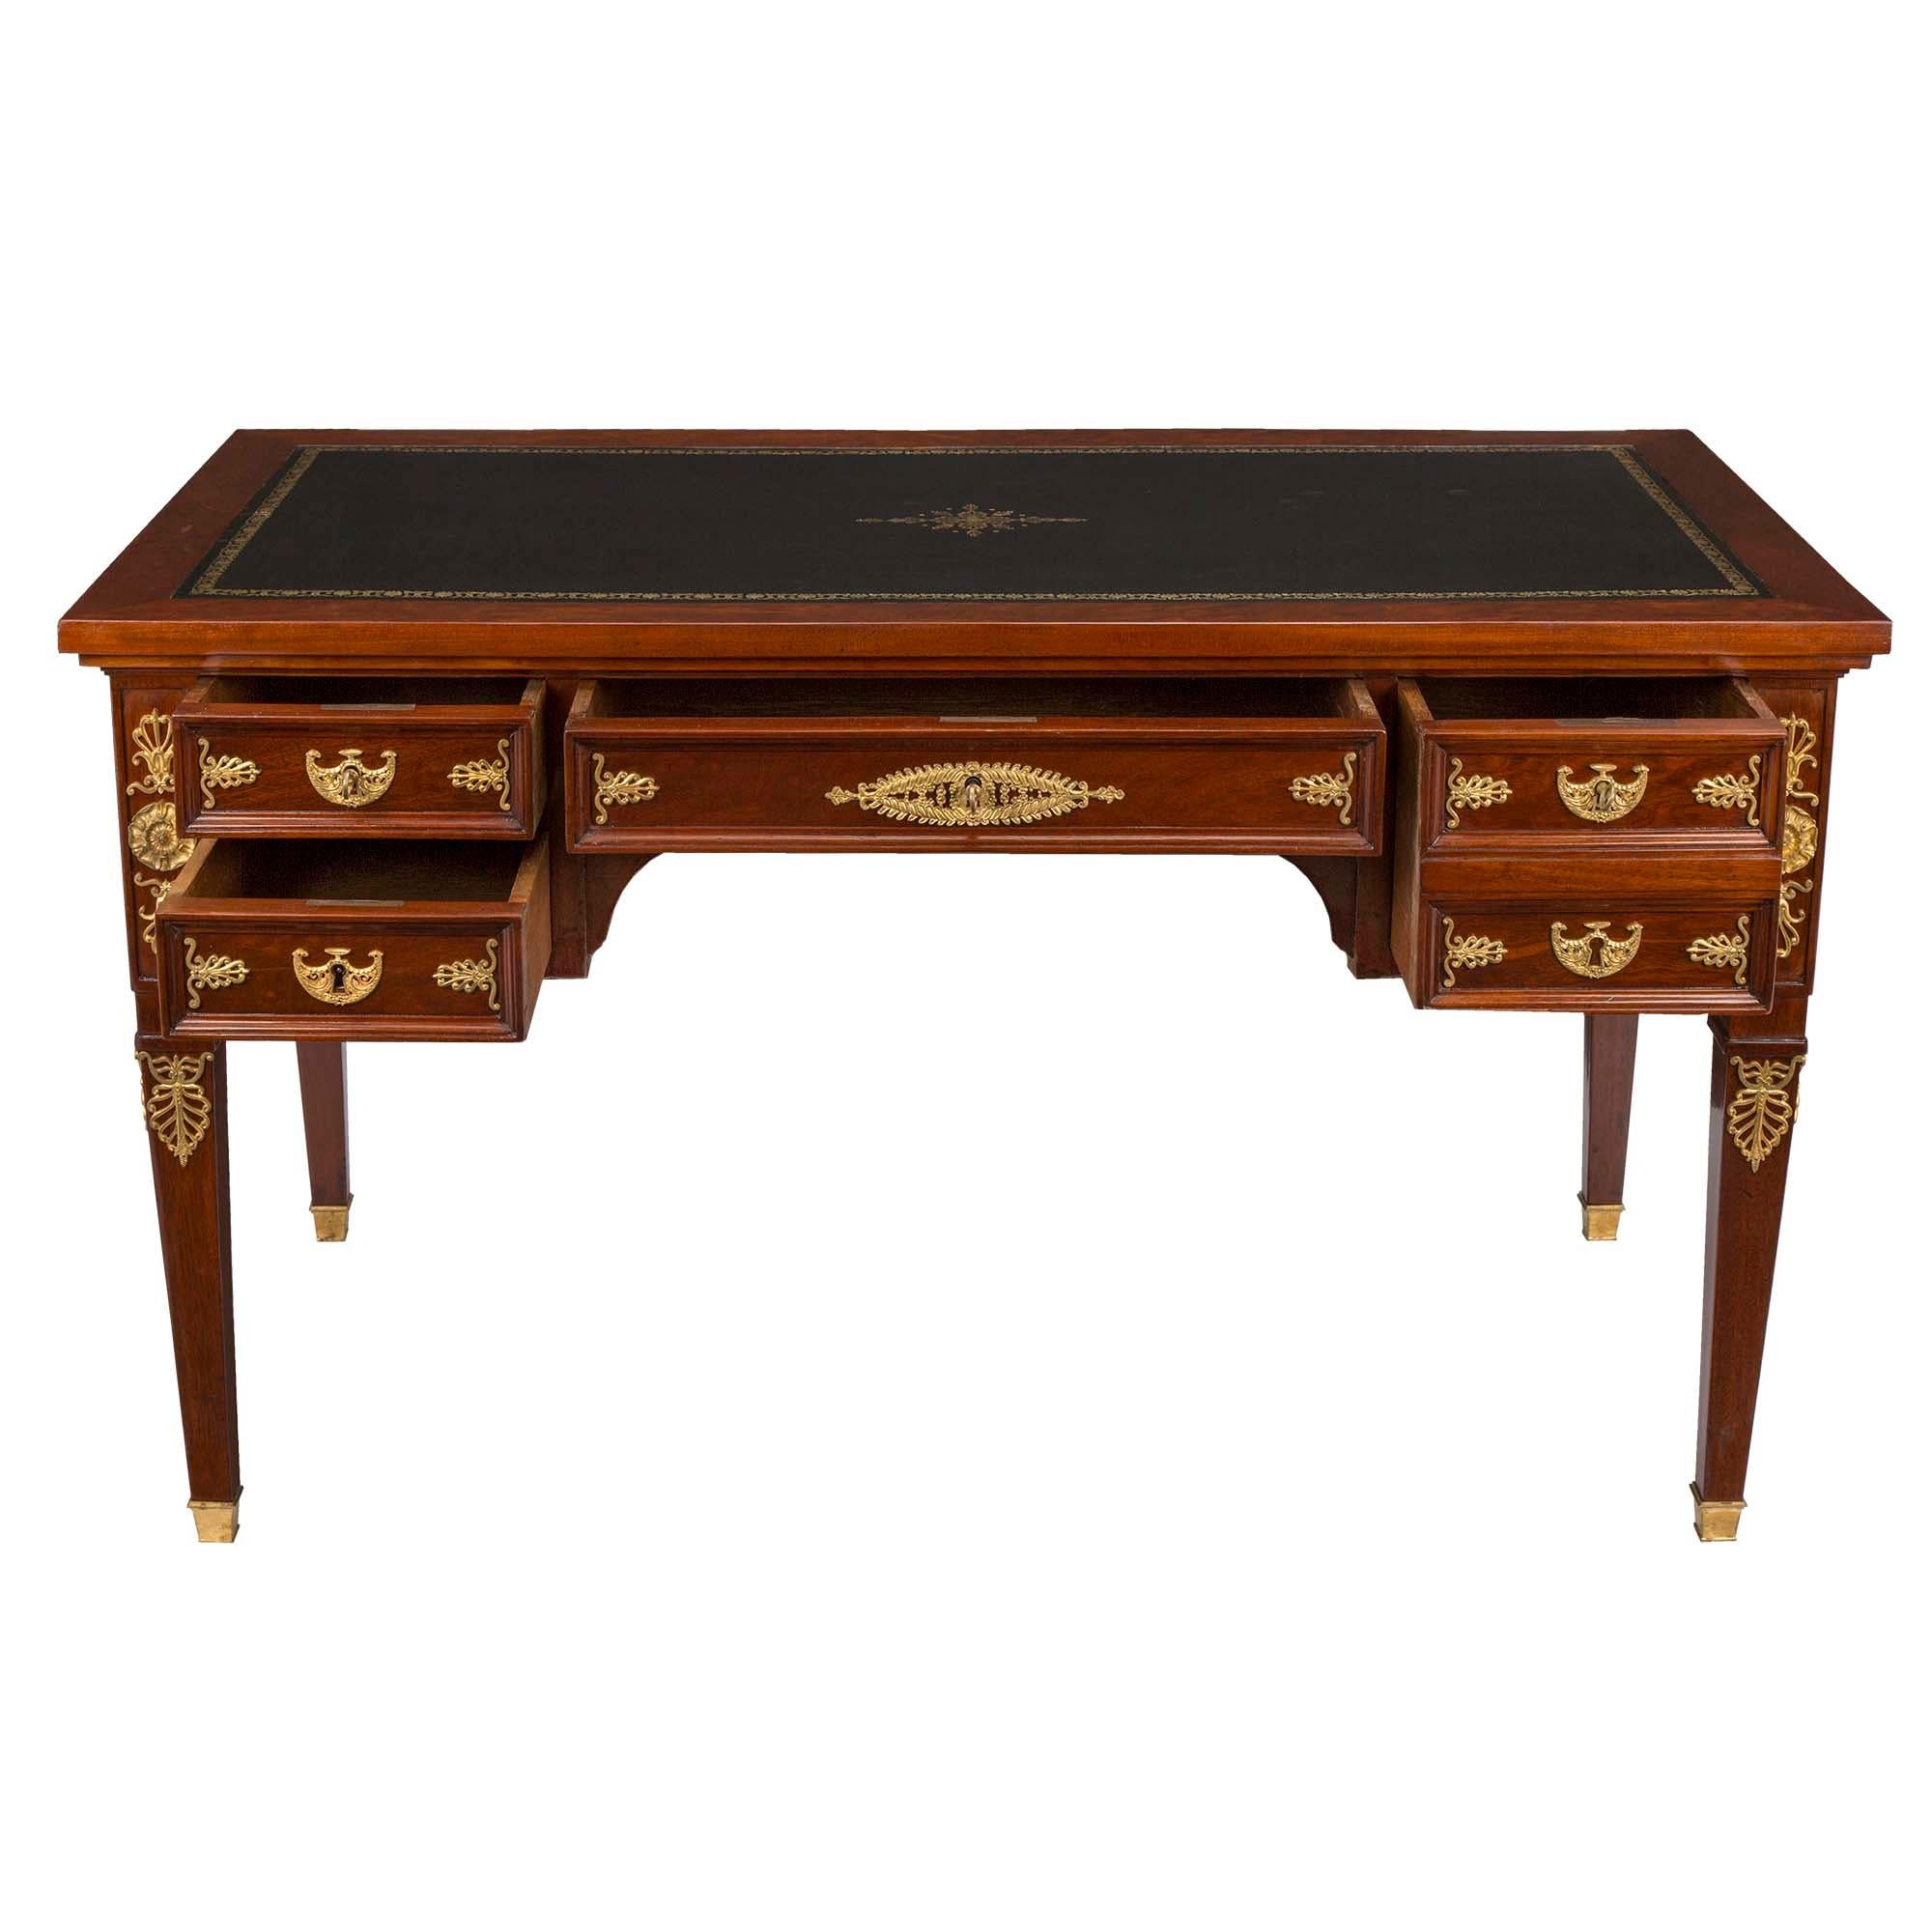 French 19th Century Empire Style Mahogany and Ormolu Bureau Plat For Sale 2